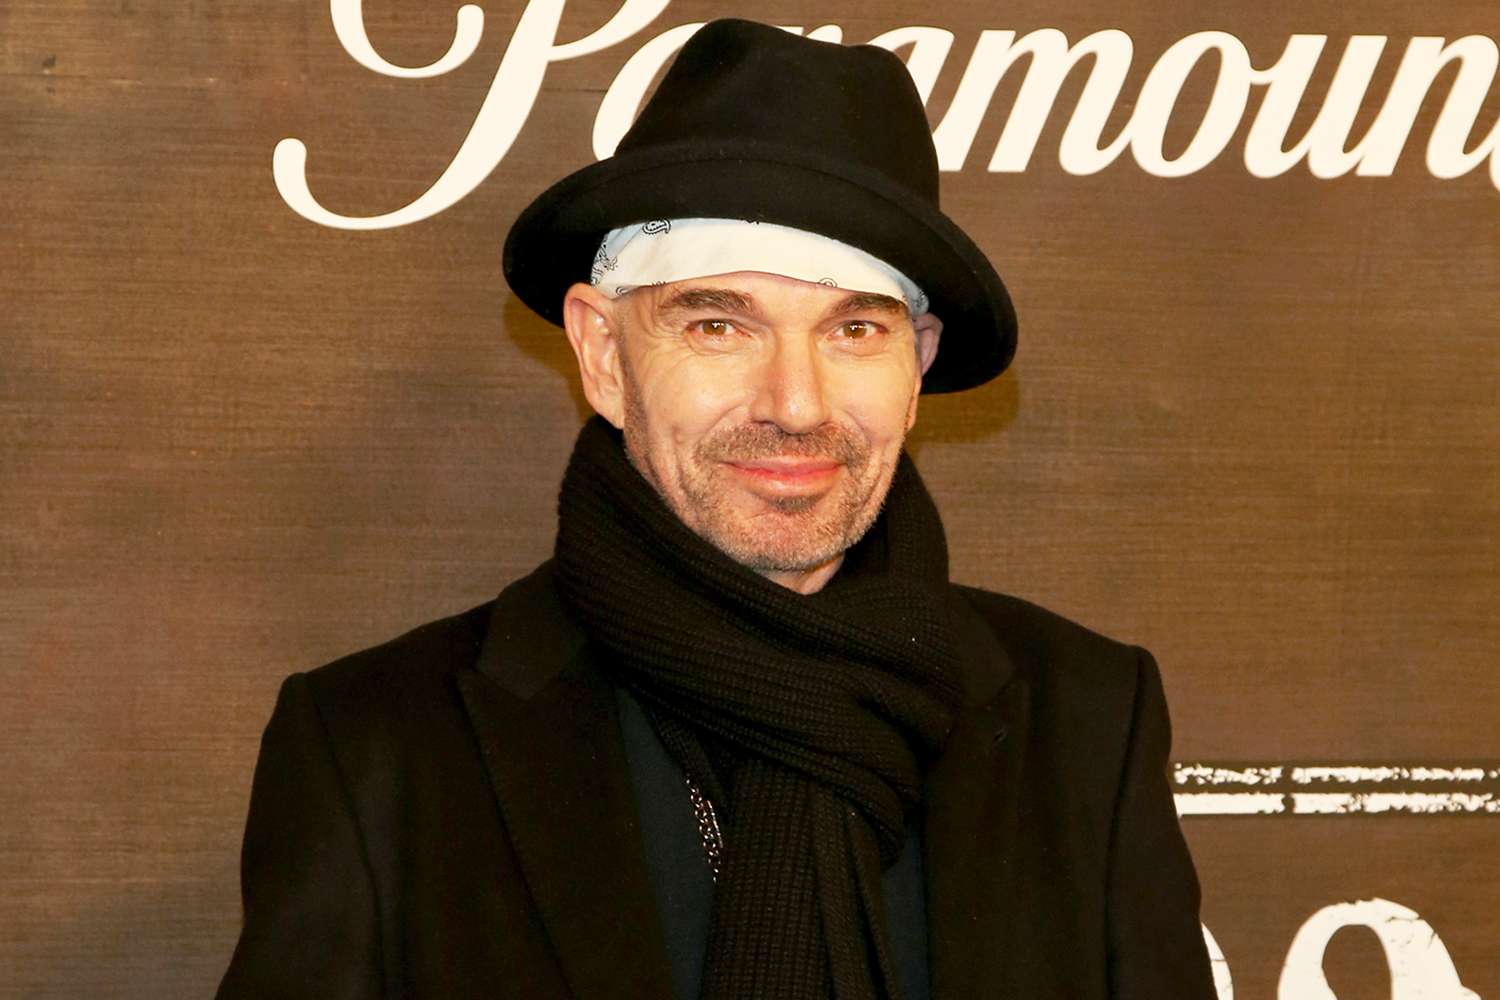 Billy Bob Thornton attends the world premiere of "1883" at the Encore Beach Club at Encore Las Vegas on December 11, 2021 in Las Vegas, Nevada.